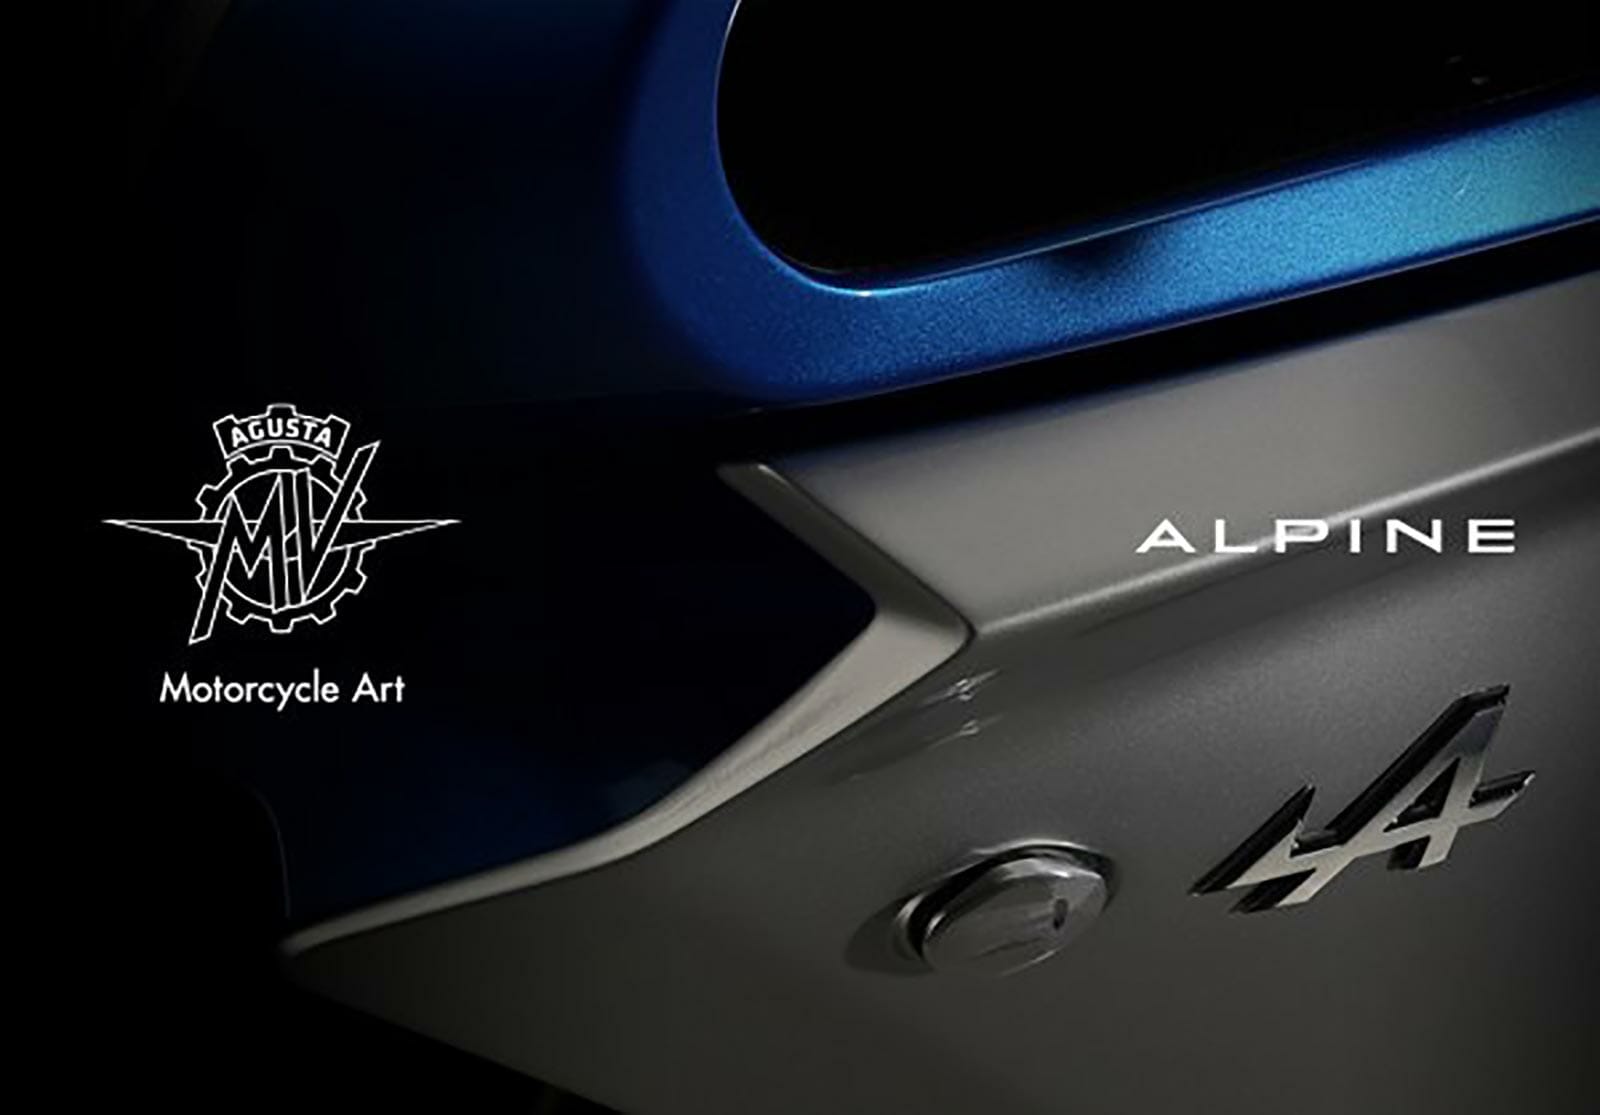 MV Agusta teasers model Alpine
- also in the MOTORCYCLES.NEWS APP